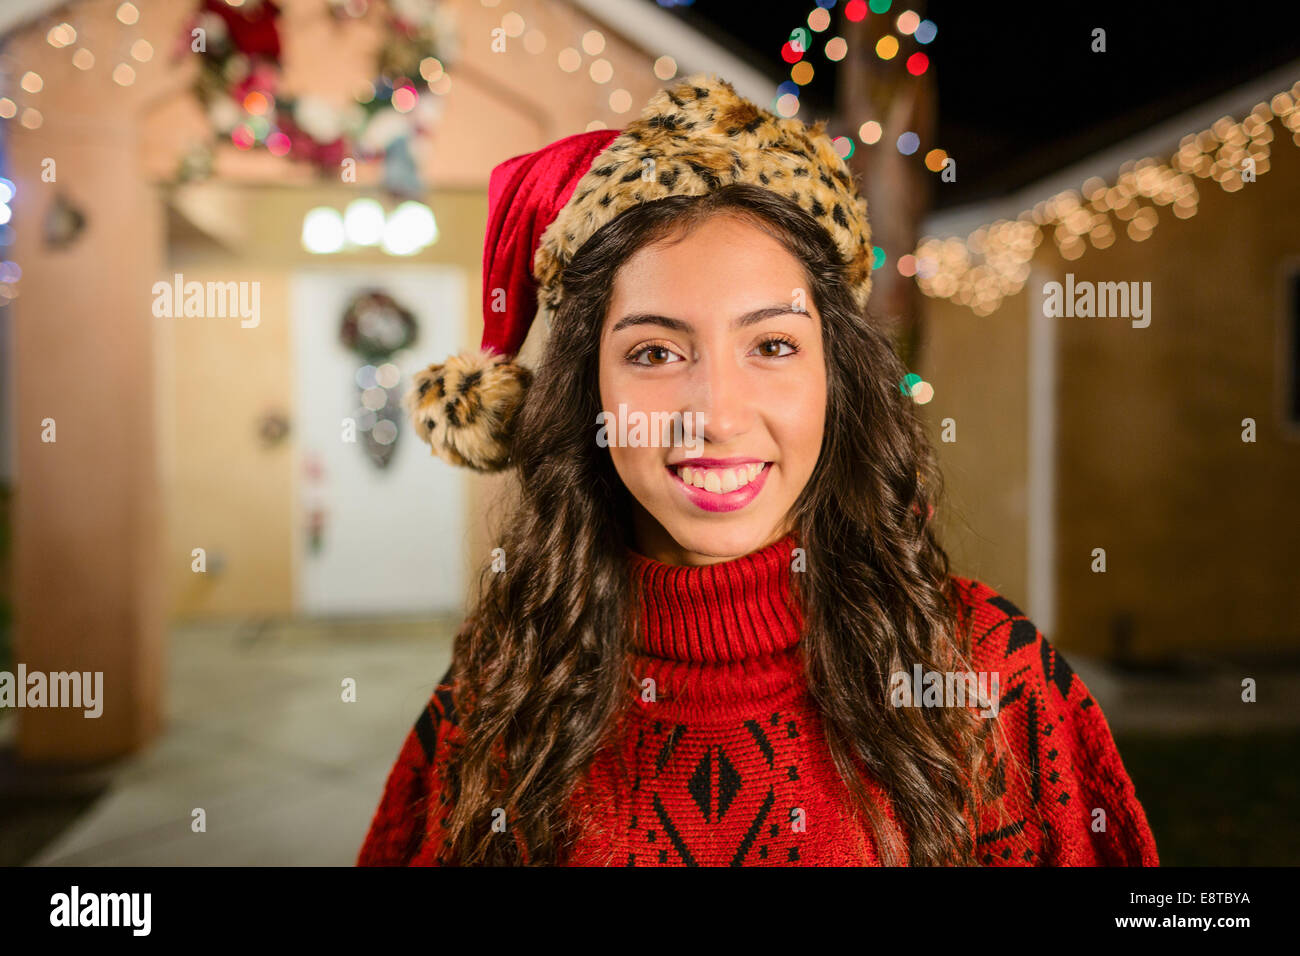 Hispanic woman smiling outside house decorated with string lights Stock Photo